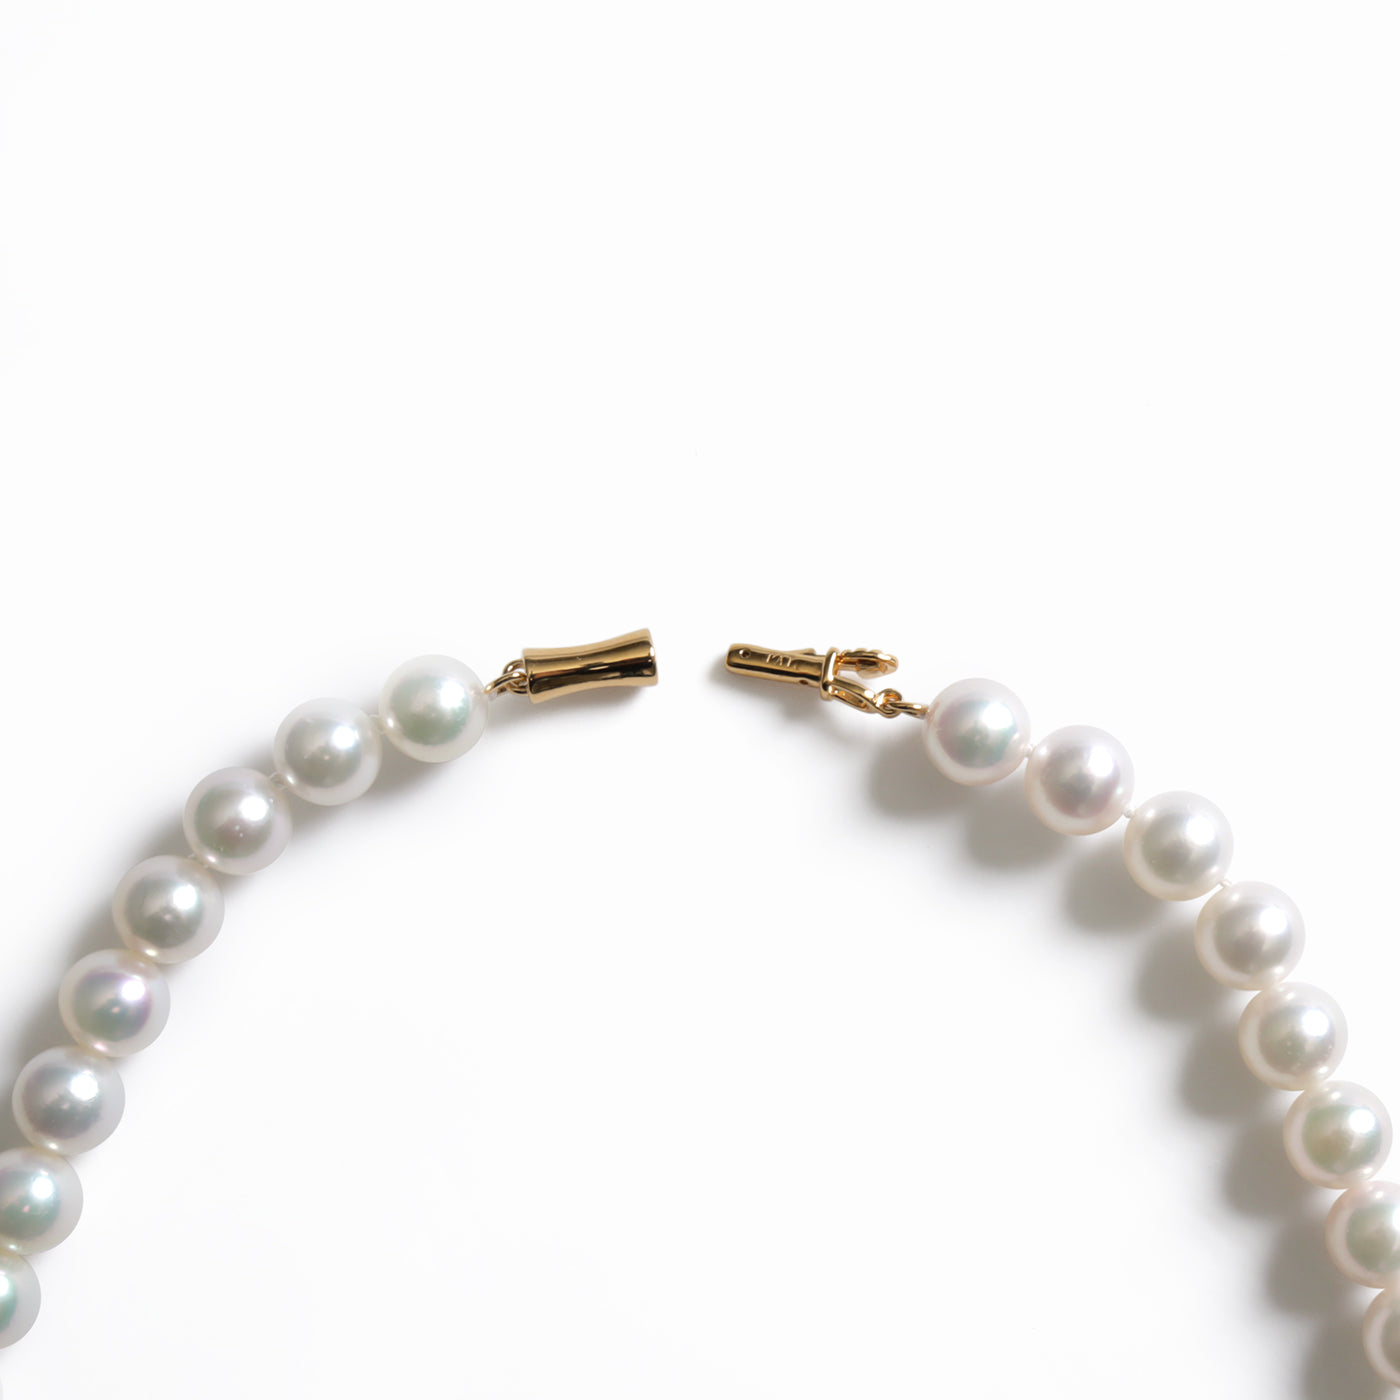 Akoya Pearl Necklace - 7.0-7.5mm アコヤパール